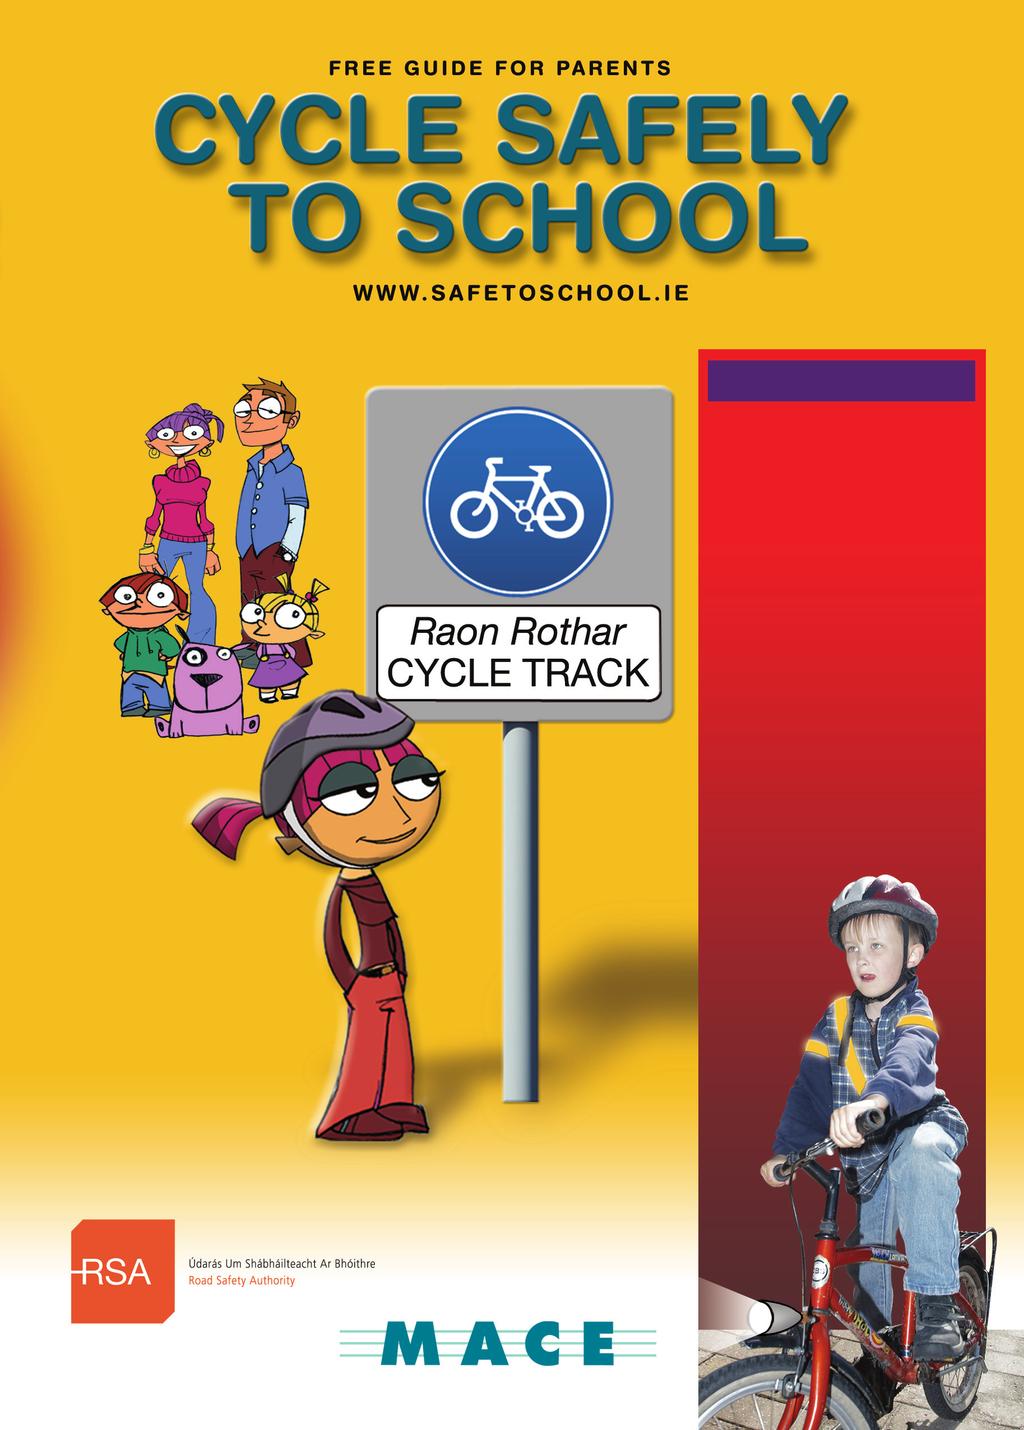 4168 M CYCLE PGUIDE A5 1/31/08 3:06 PM Page 3 Guide Contains: Cycling to School Safely Guide, for your children Safe Cross Code Parent Information FREE Safe to School Flashing Reflector